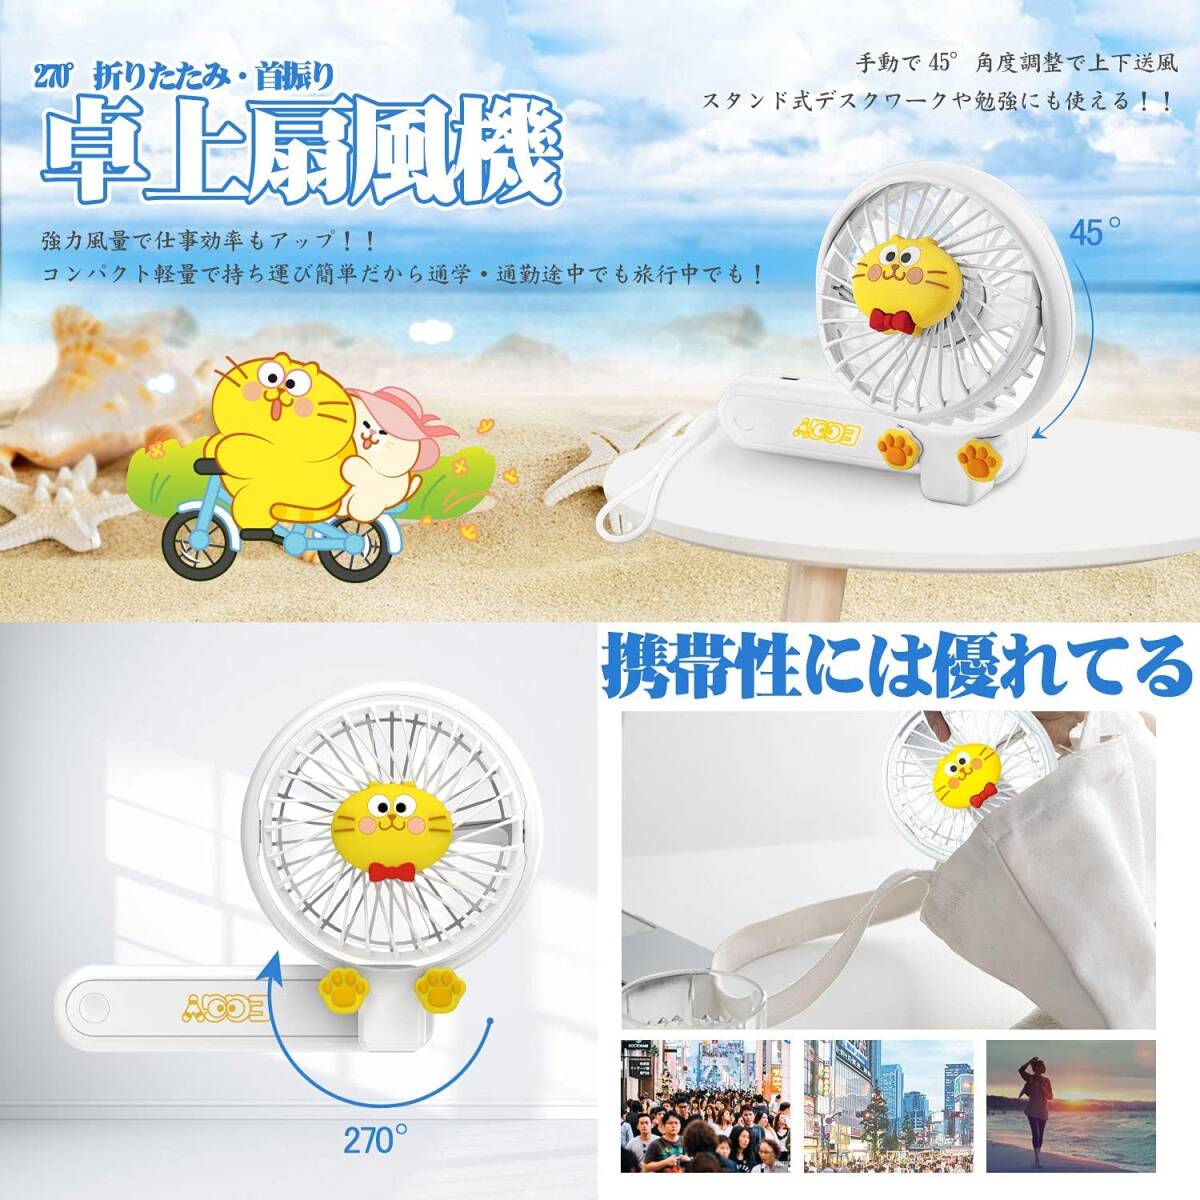  franc franc electric fan handy Mini folding yawing aroma mat attaching in stock electric fan powerful usb charge cat Cara quiet sound light weight 